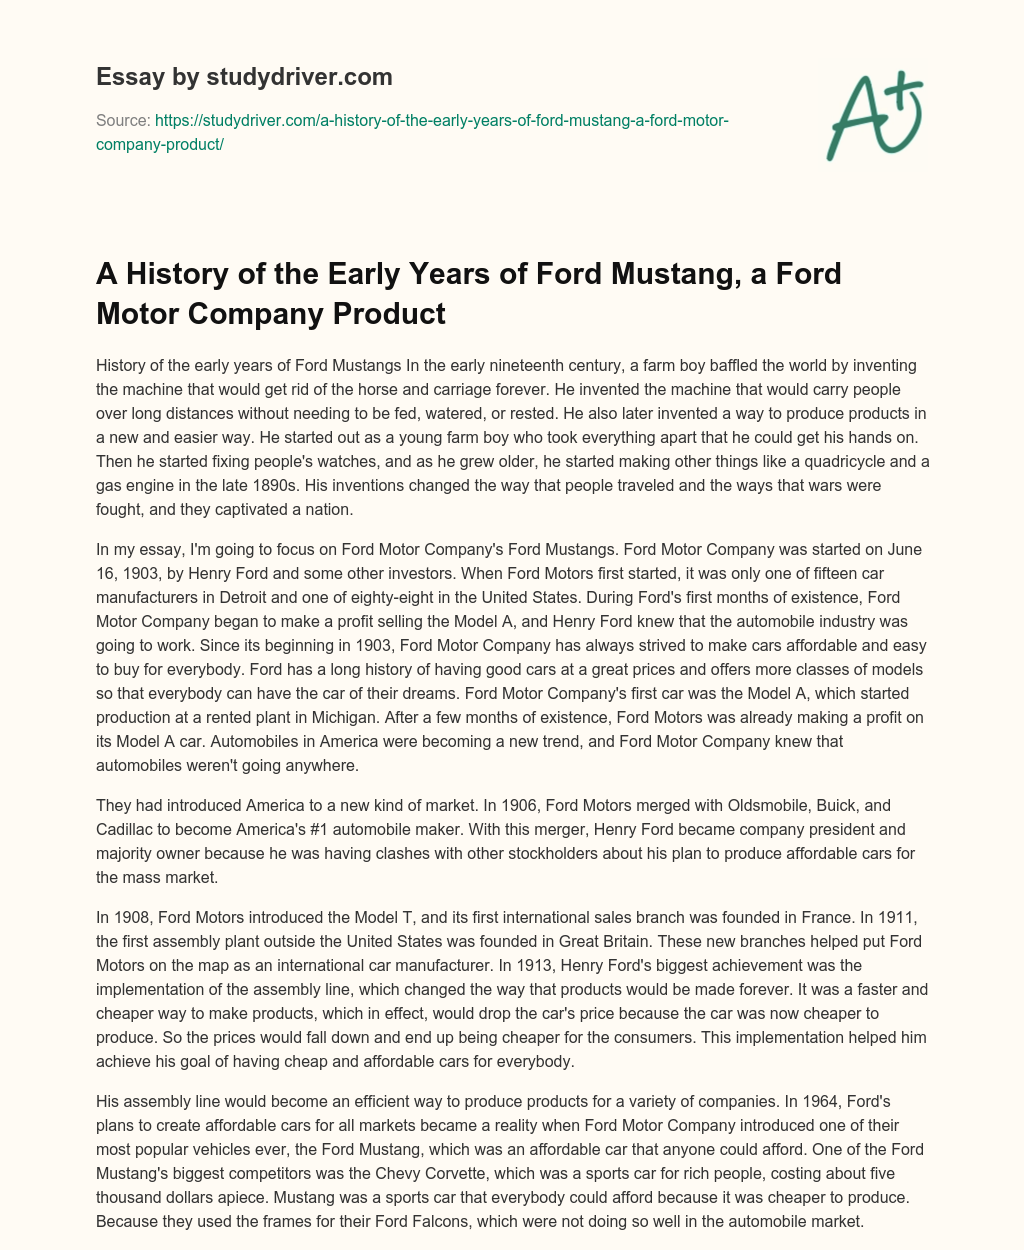 A History of the Early Years of Ford Mustang, a Ford Motor Company Product essay